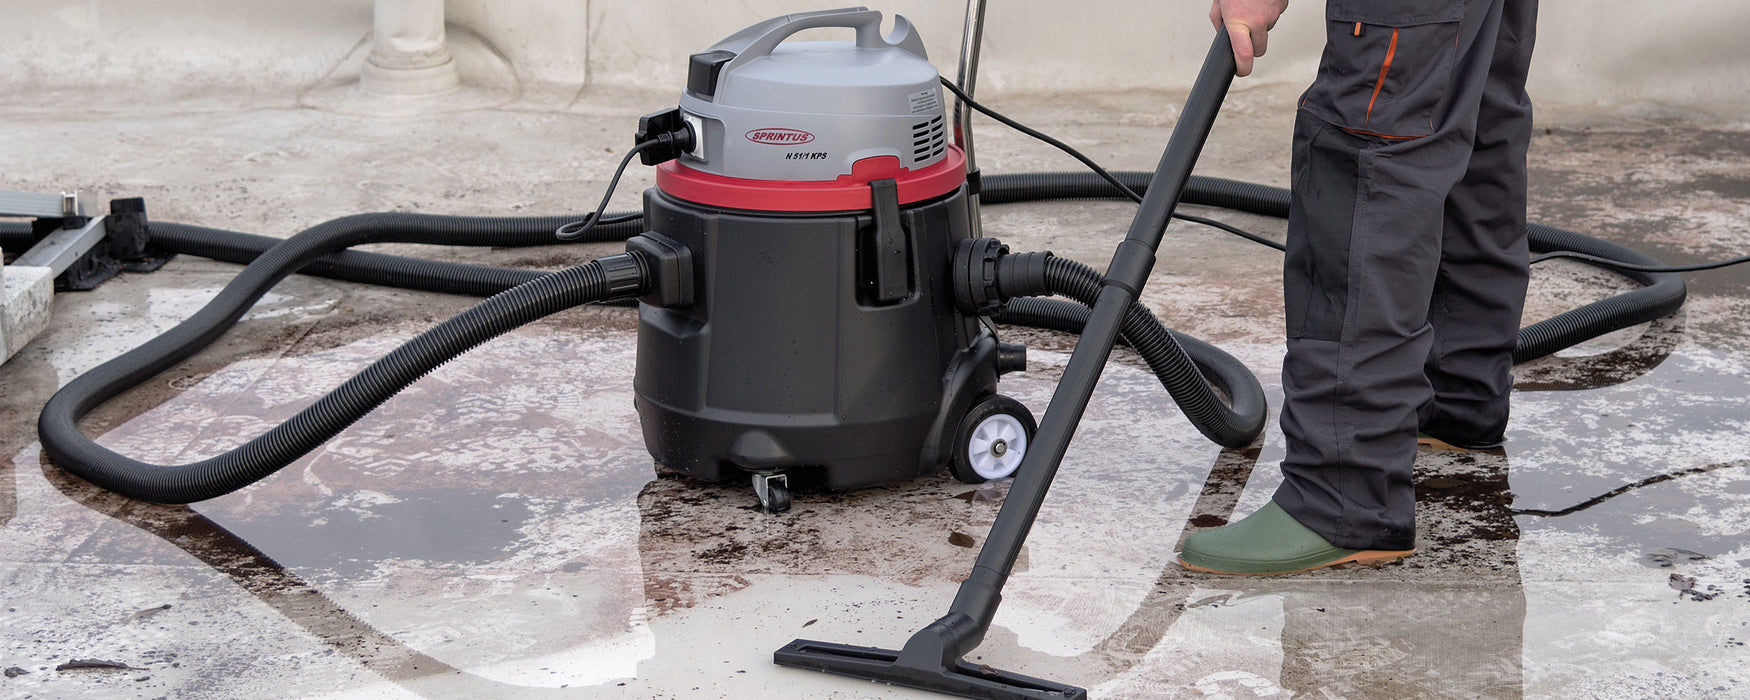 Sprintus N51 50L Commercial Wet and Dry Vacuum with Pump-out Feature